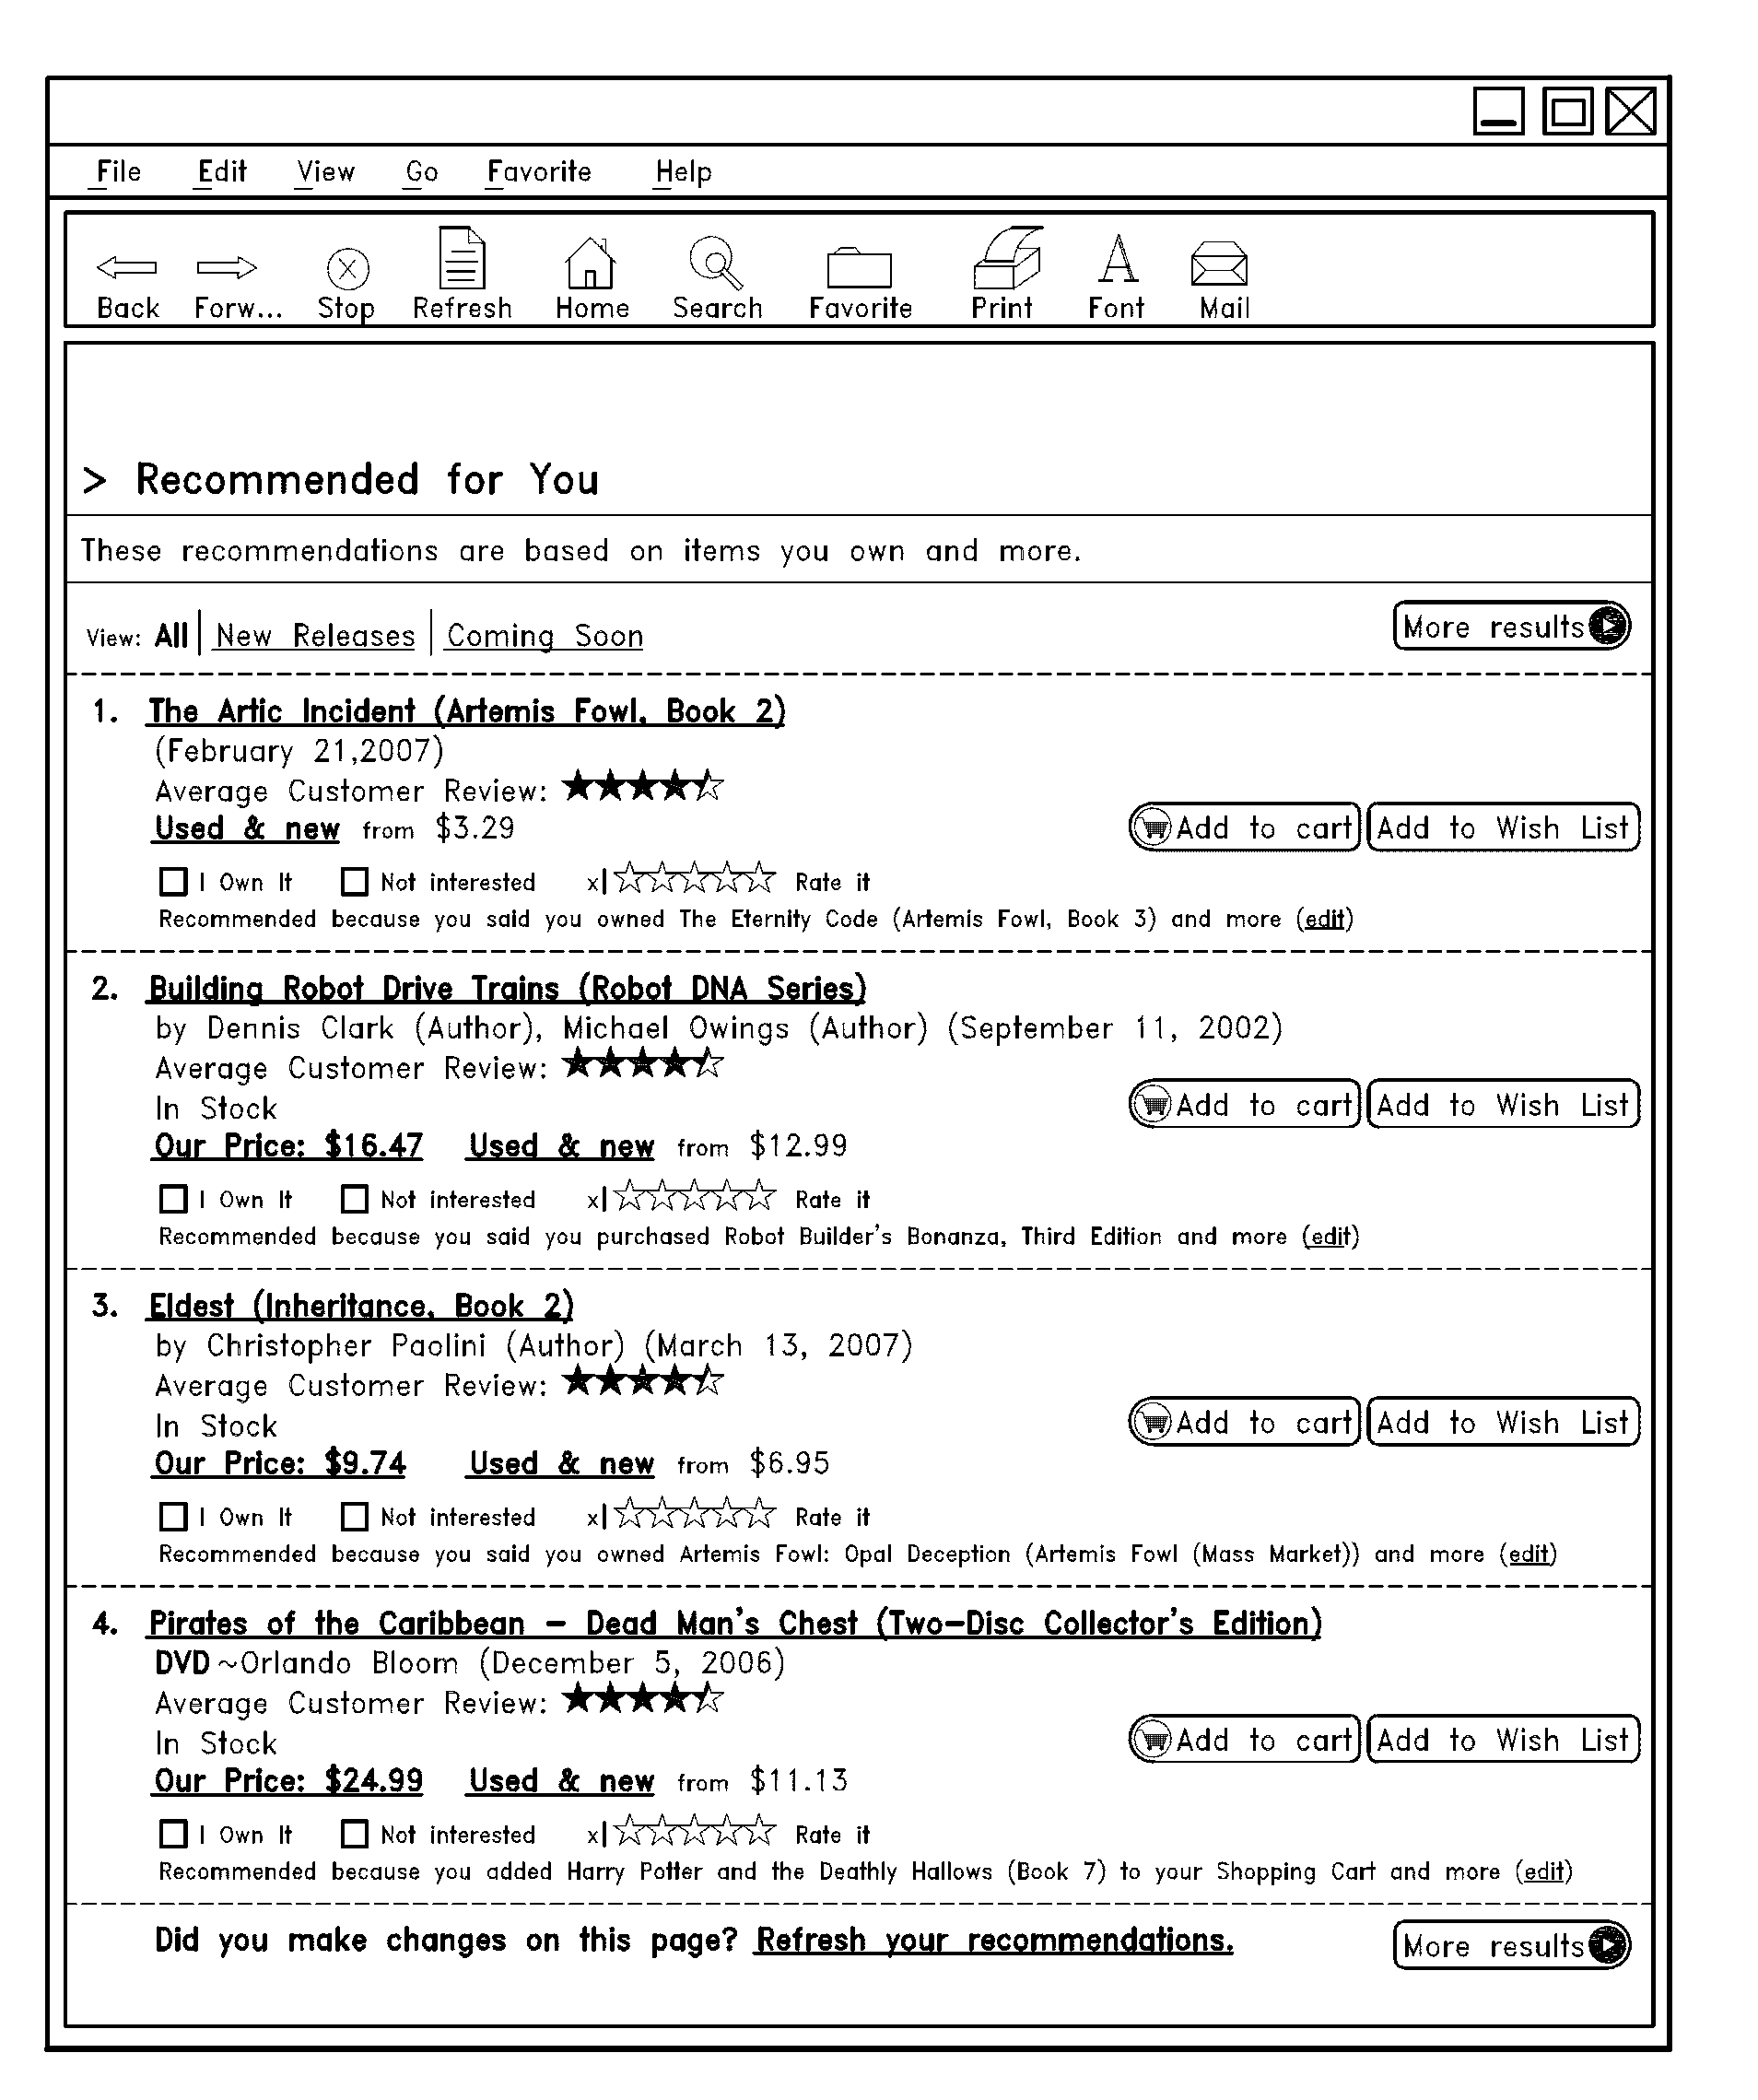 Recommendation system capable of adapting to user feedback